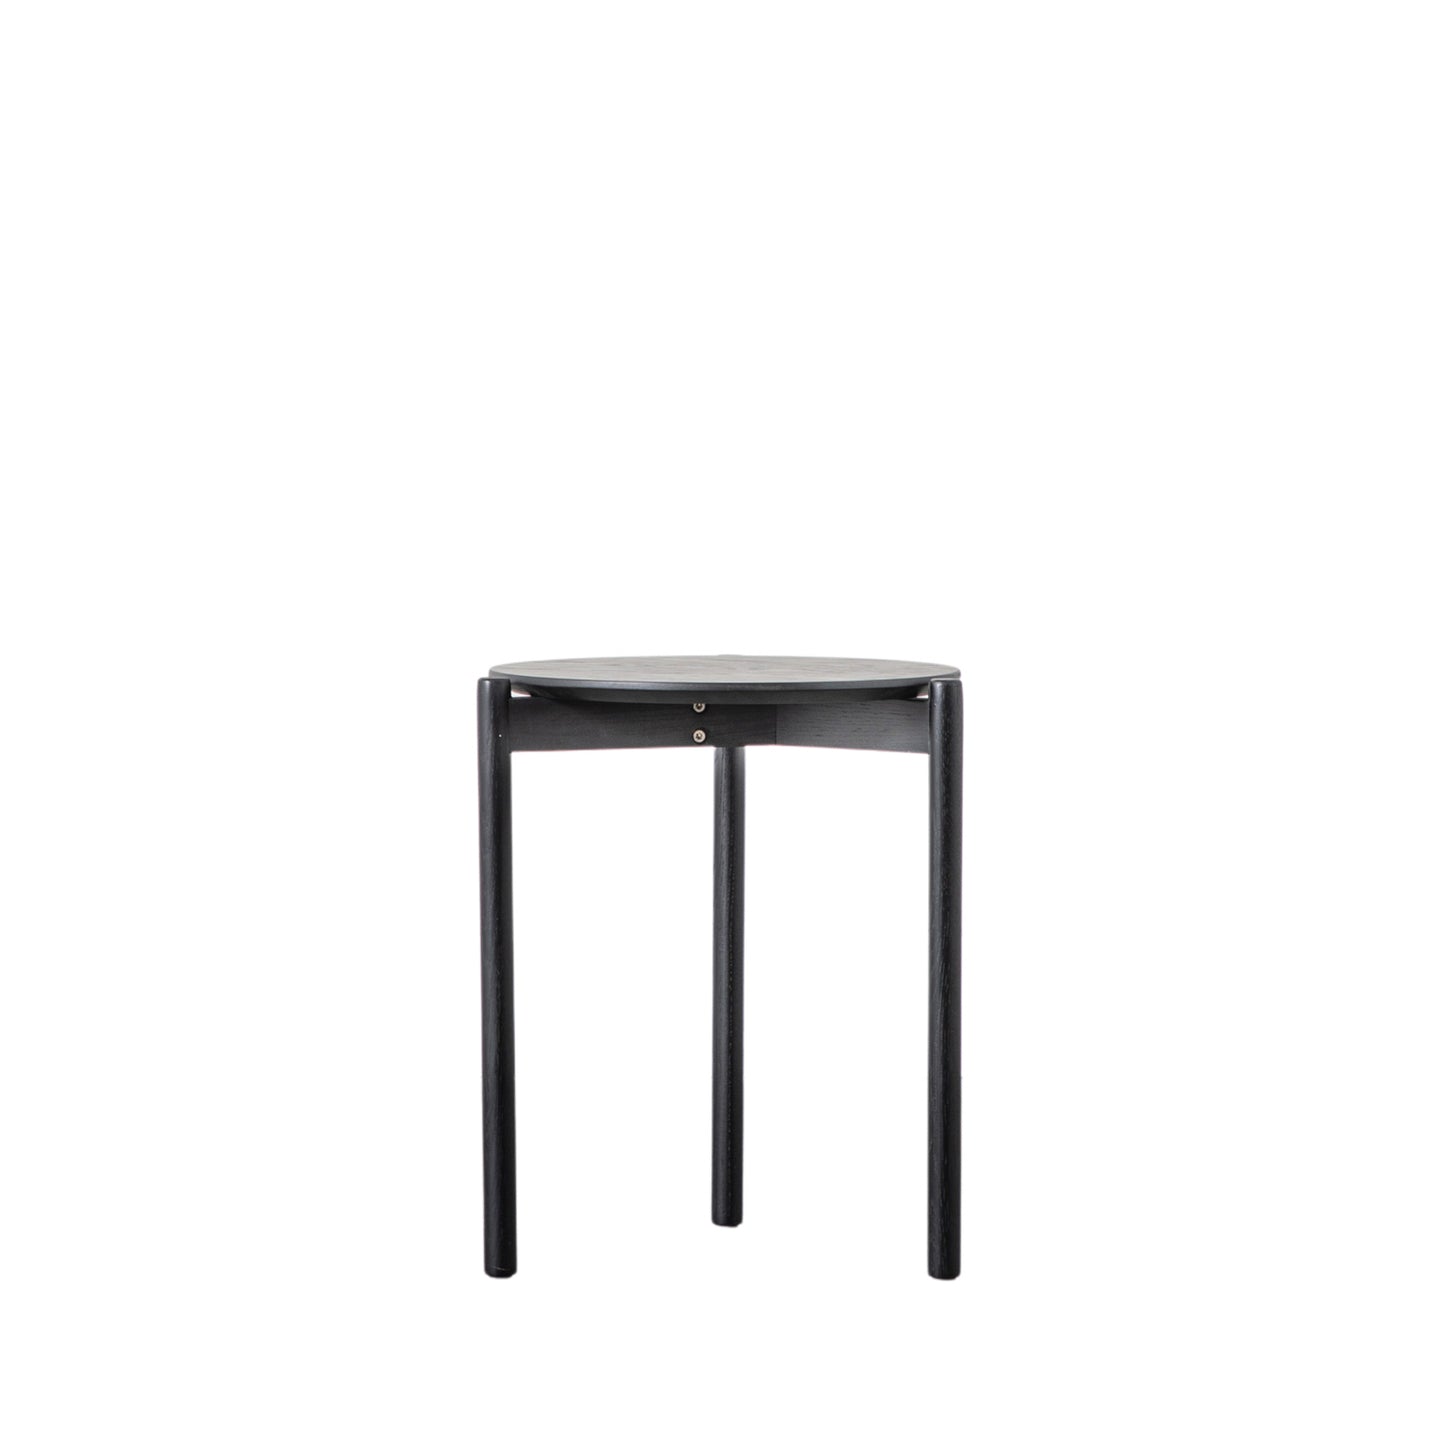 An Allington Side Table Black by Kikiathome.co.uk, perfect for interior decor and home furniture.